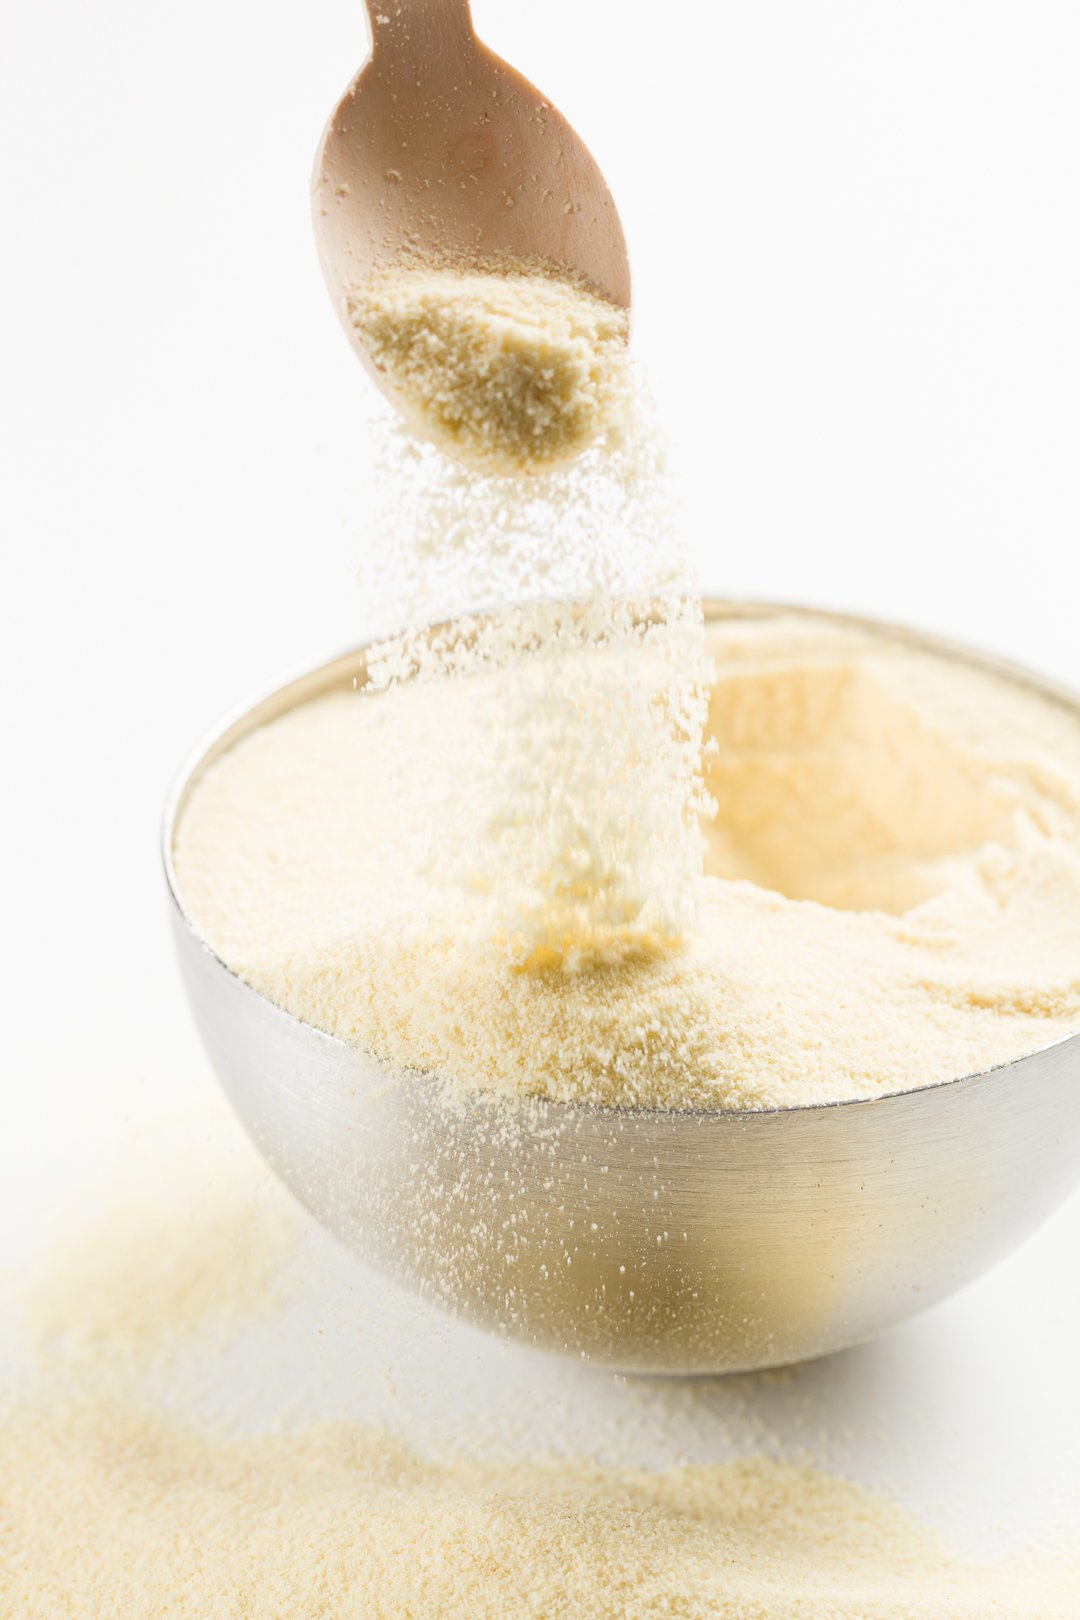 All About Semolina Flour - Differences Between Semolina and ...